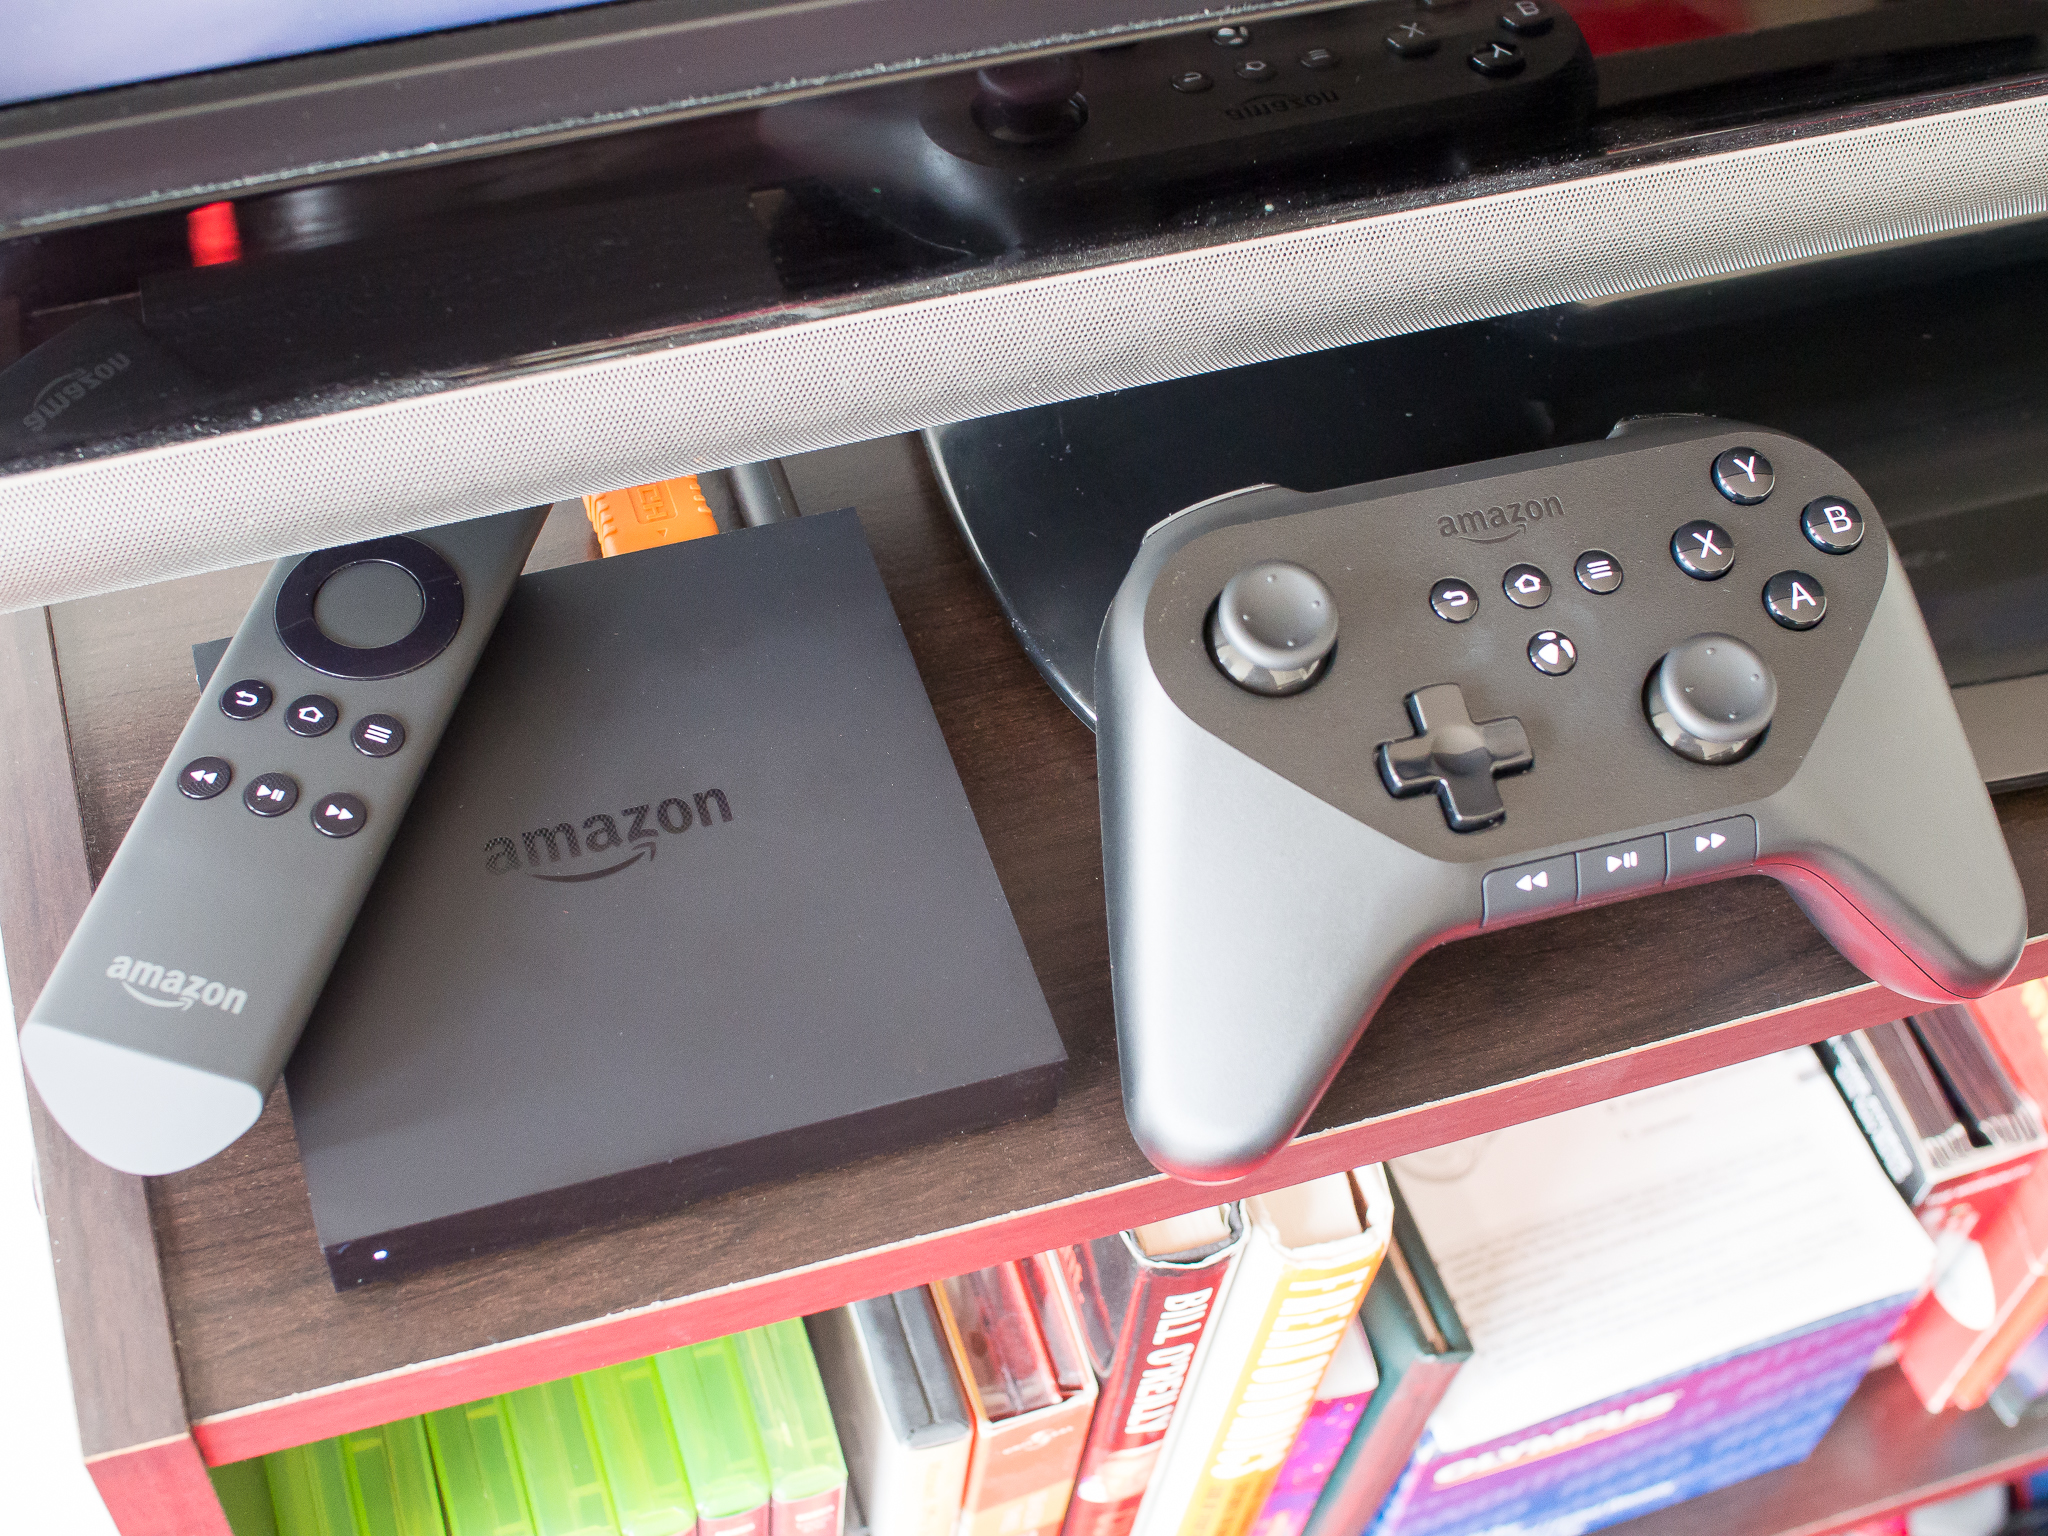 HBO shows coming to Amazon Prime Instant Video, HBO Go coming to Amazon Fire TV